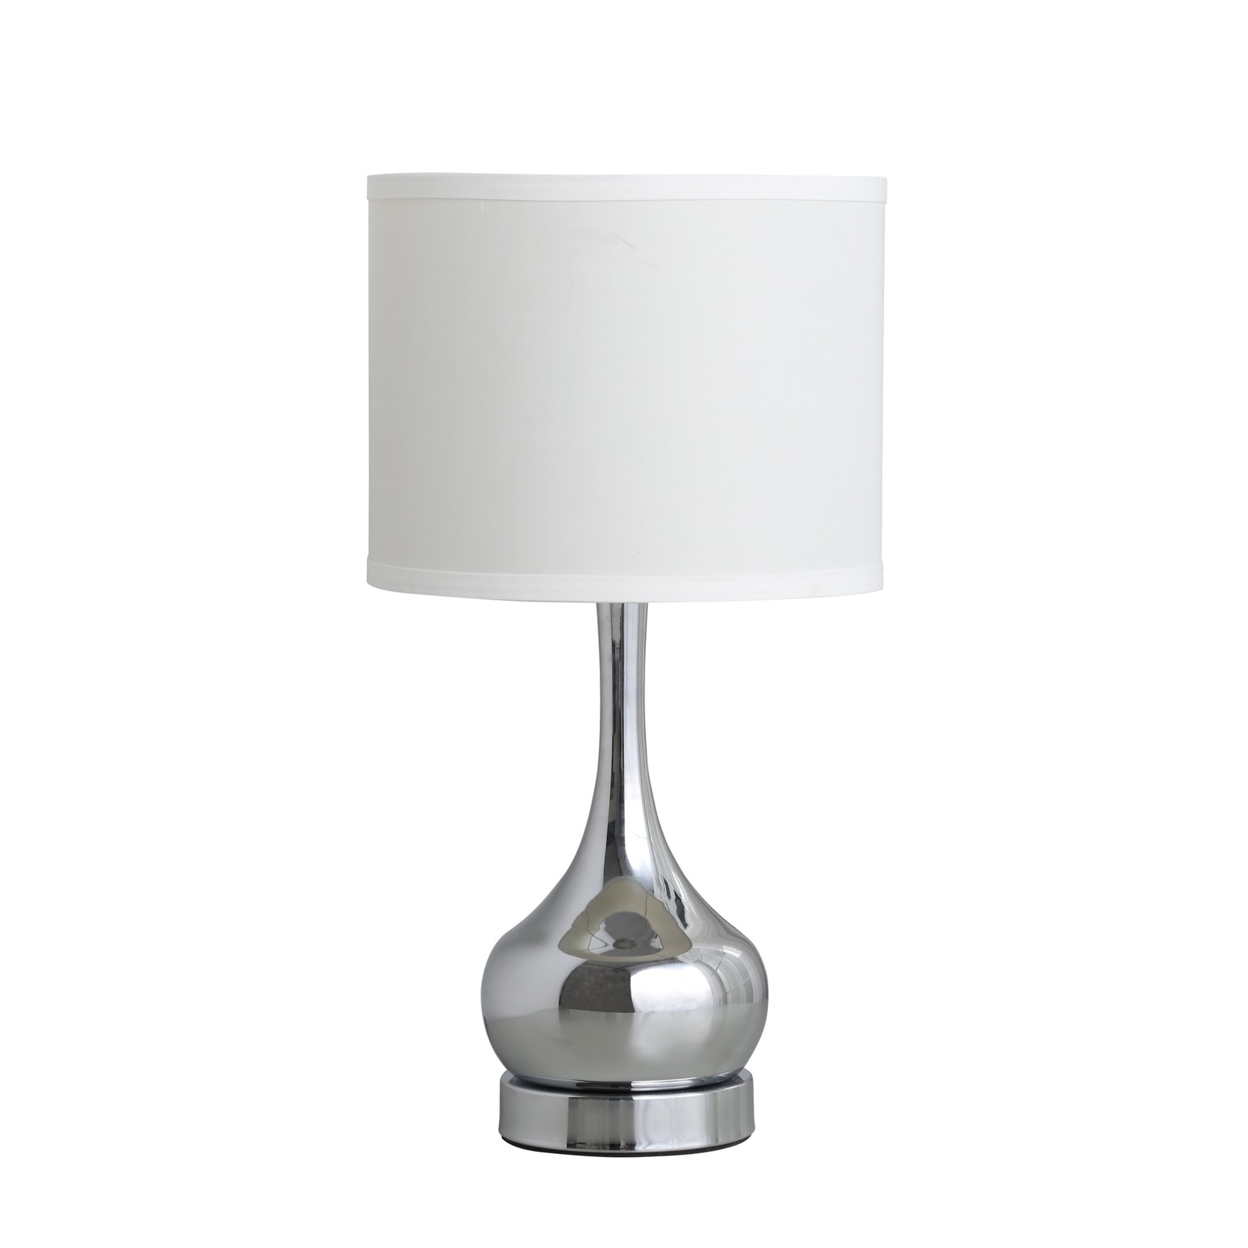 Pot Bellied Metal Body Table Lamp with Round Base, Silver- Saltoro Sherpi